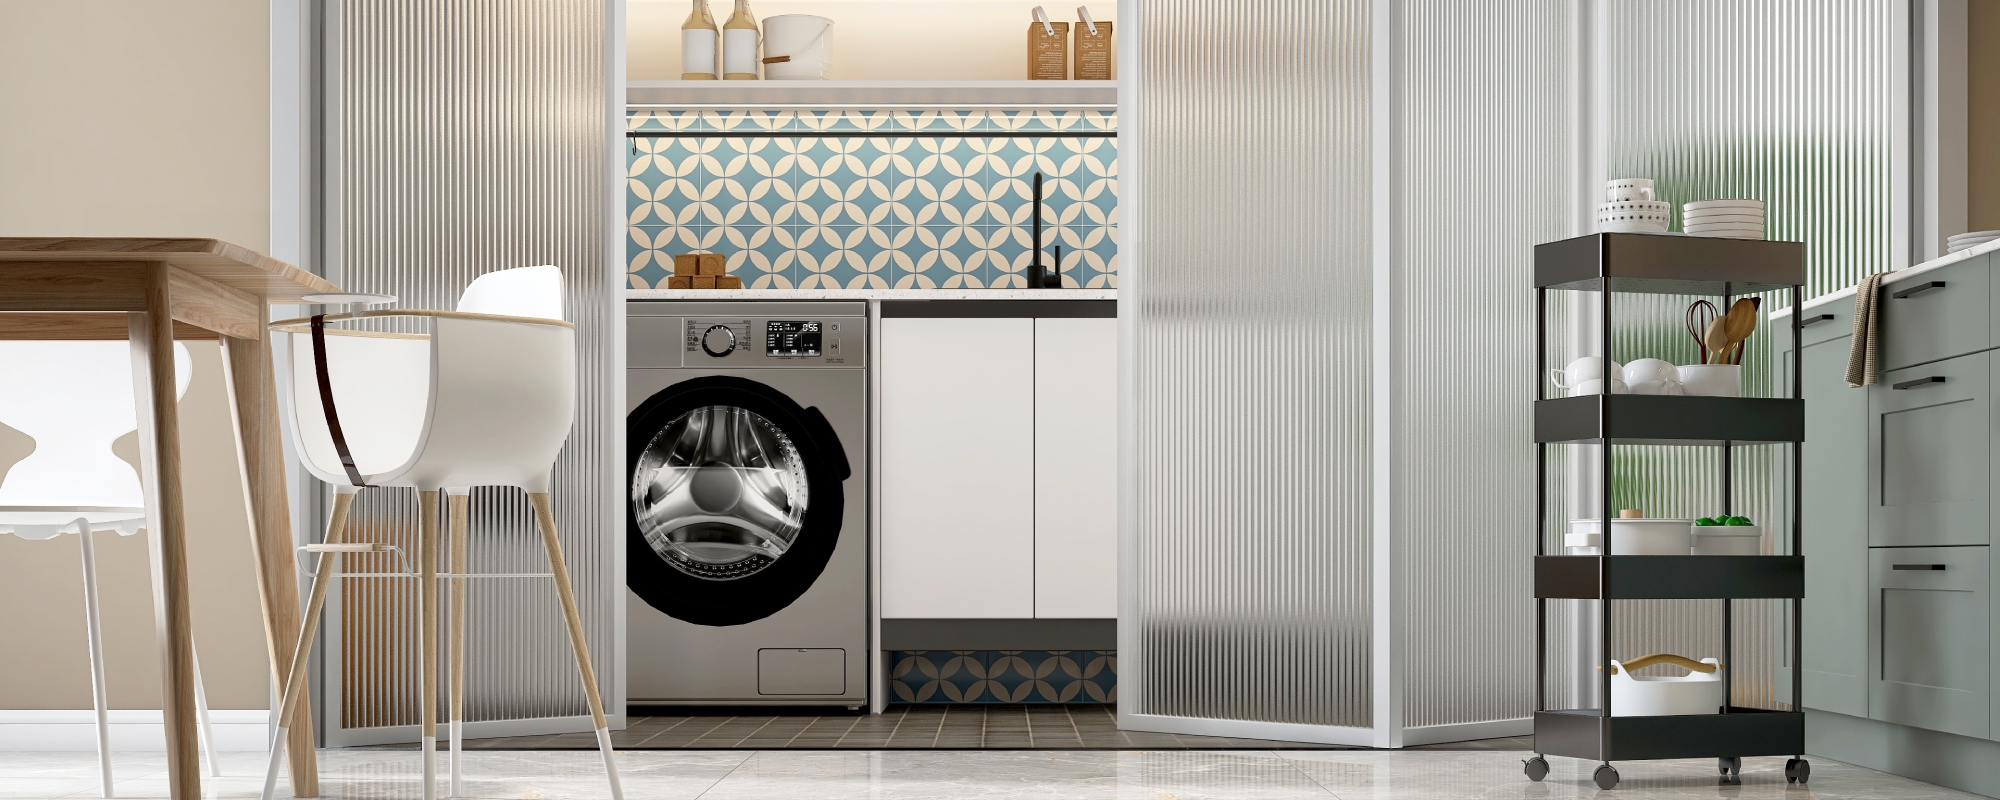 Laundry room with a teal and white pattern splashback, divided from the dining room by a blurred glass folding wall